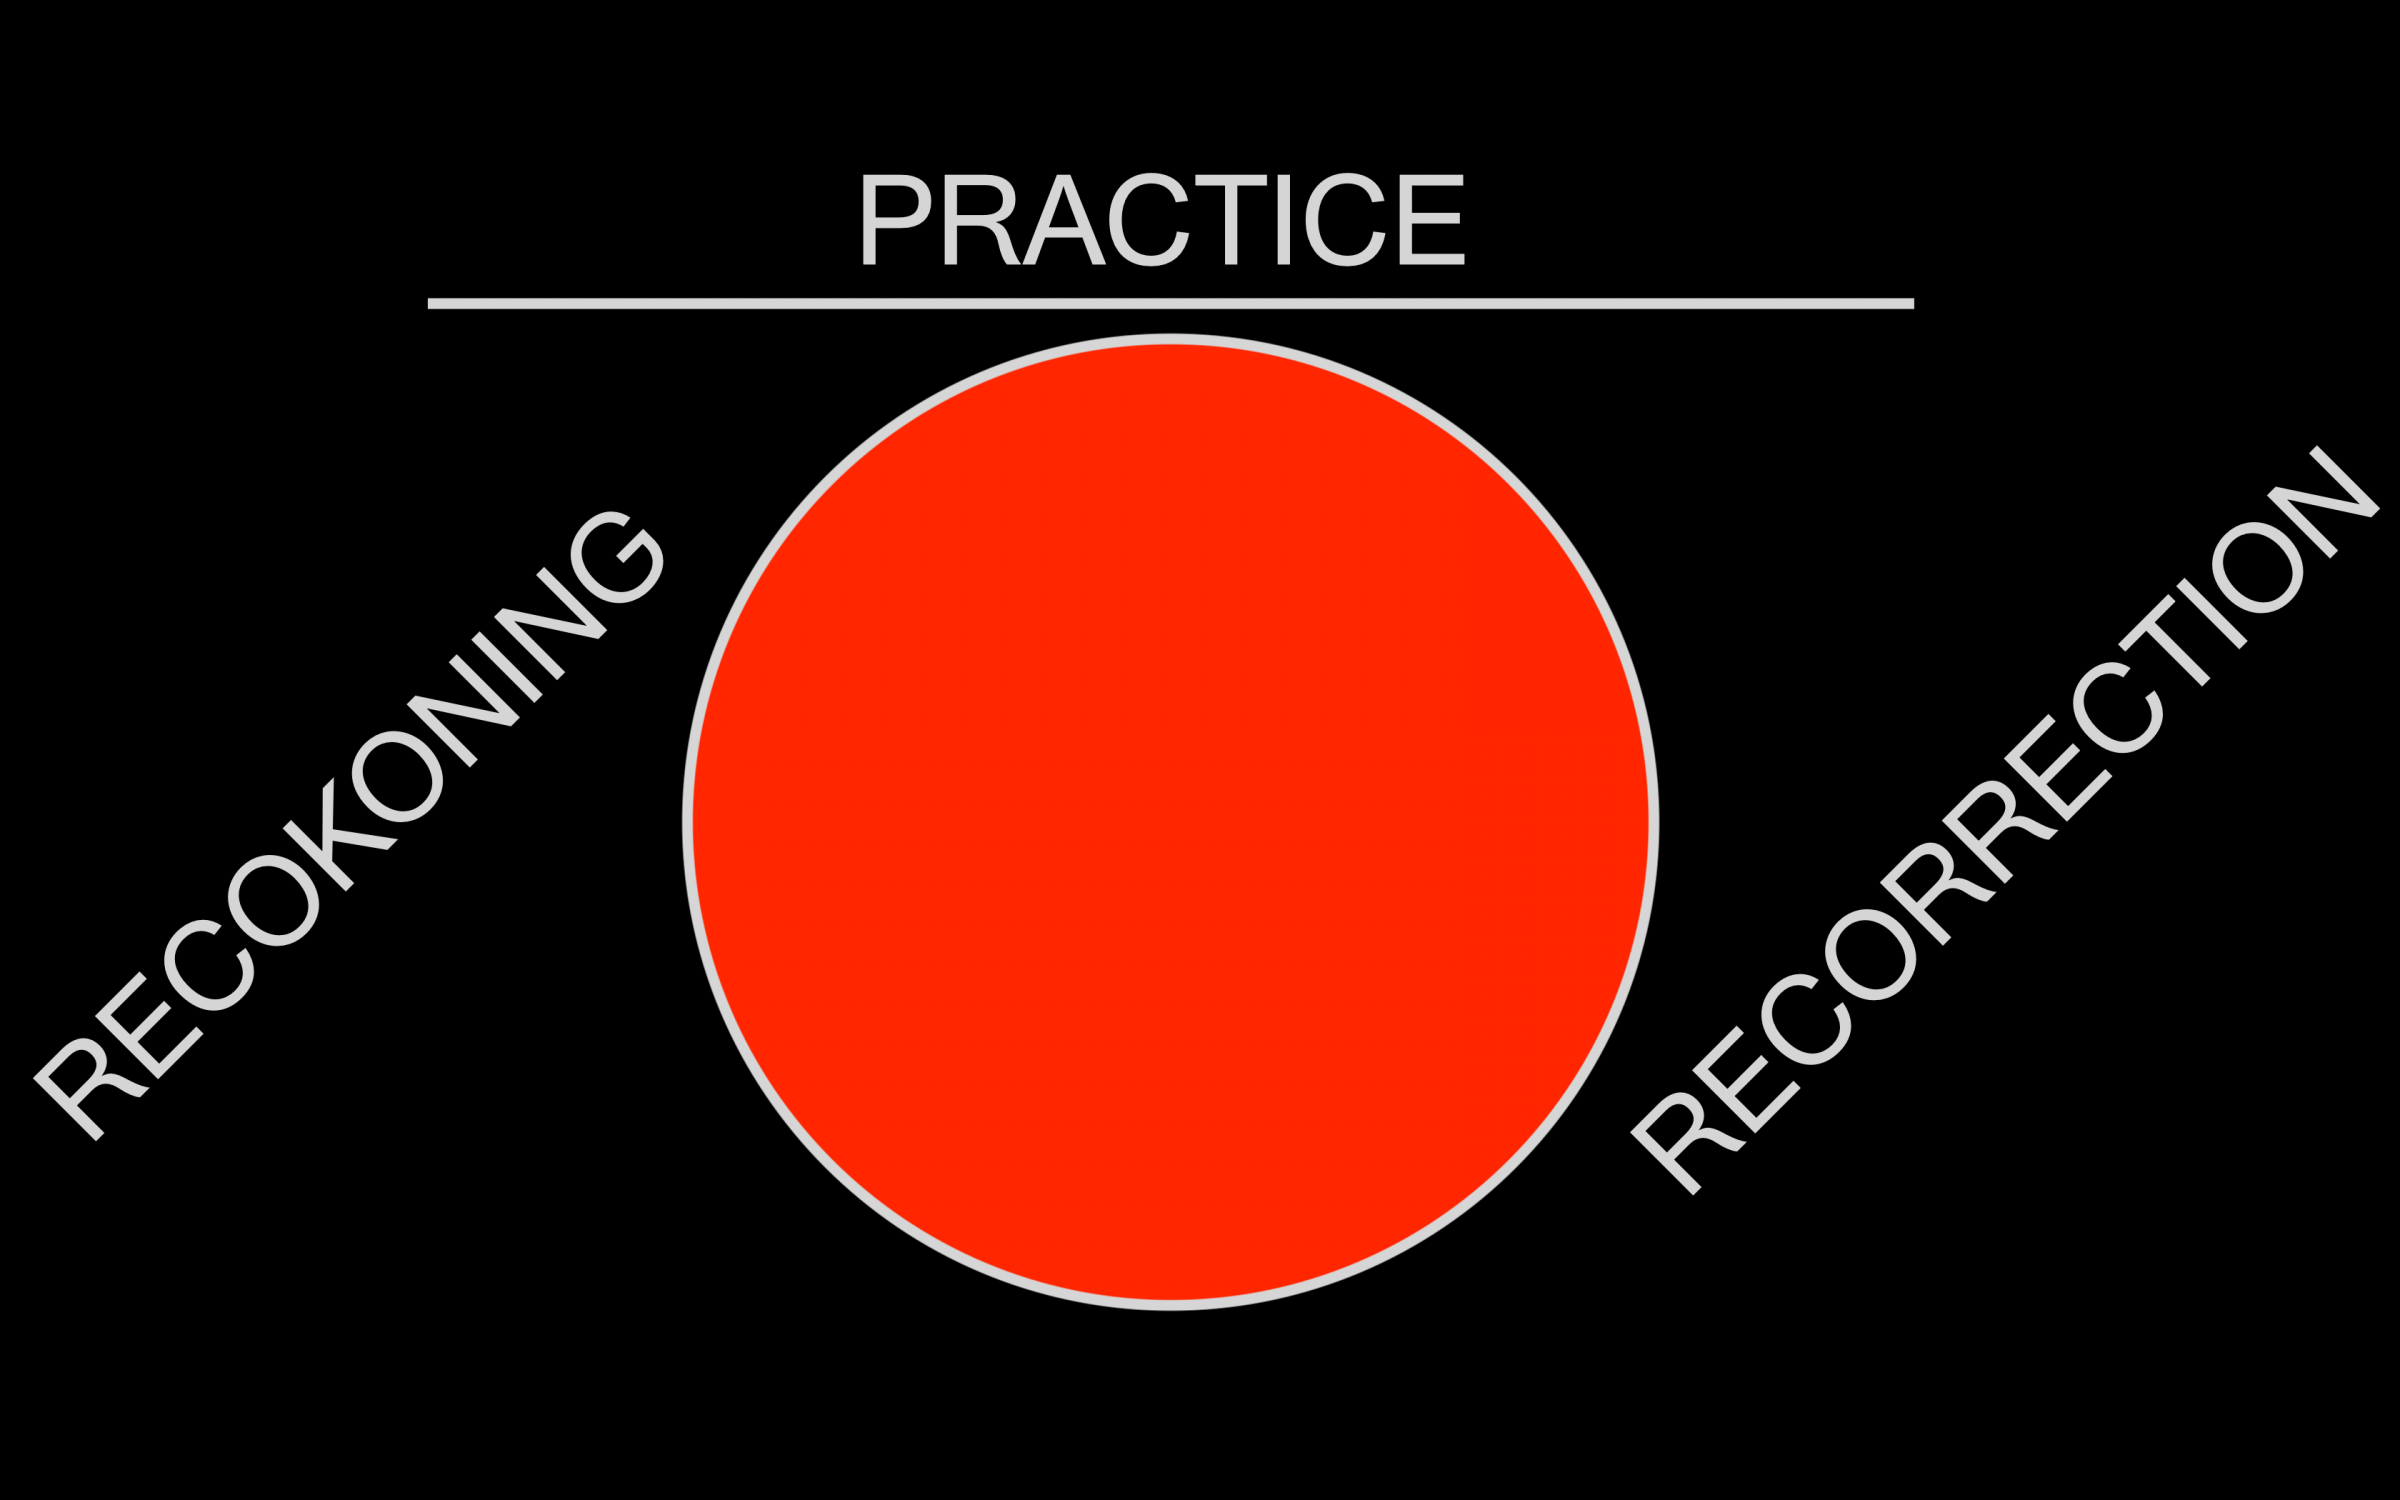 Reckoning & re-correction (practice for play)